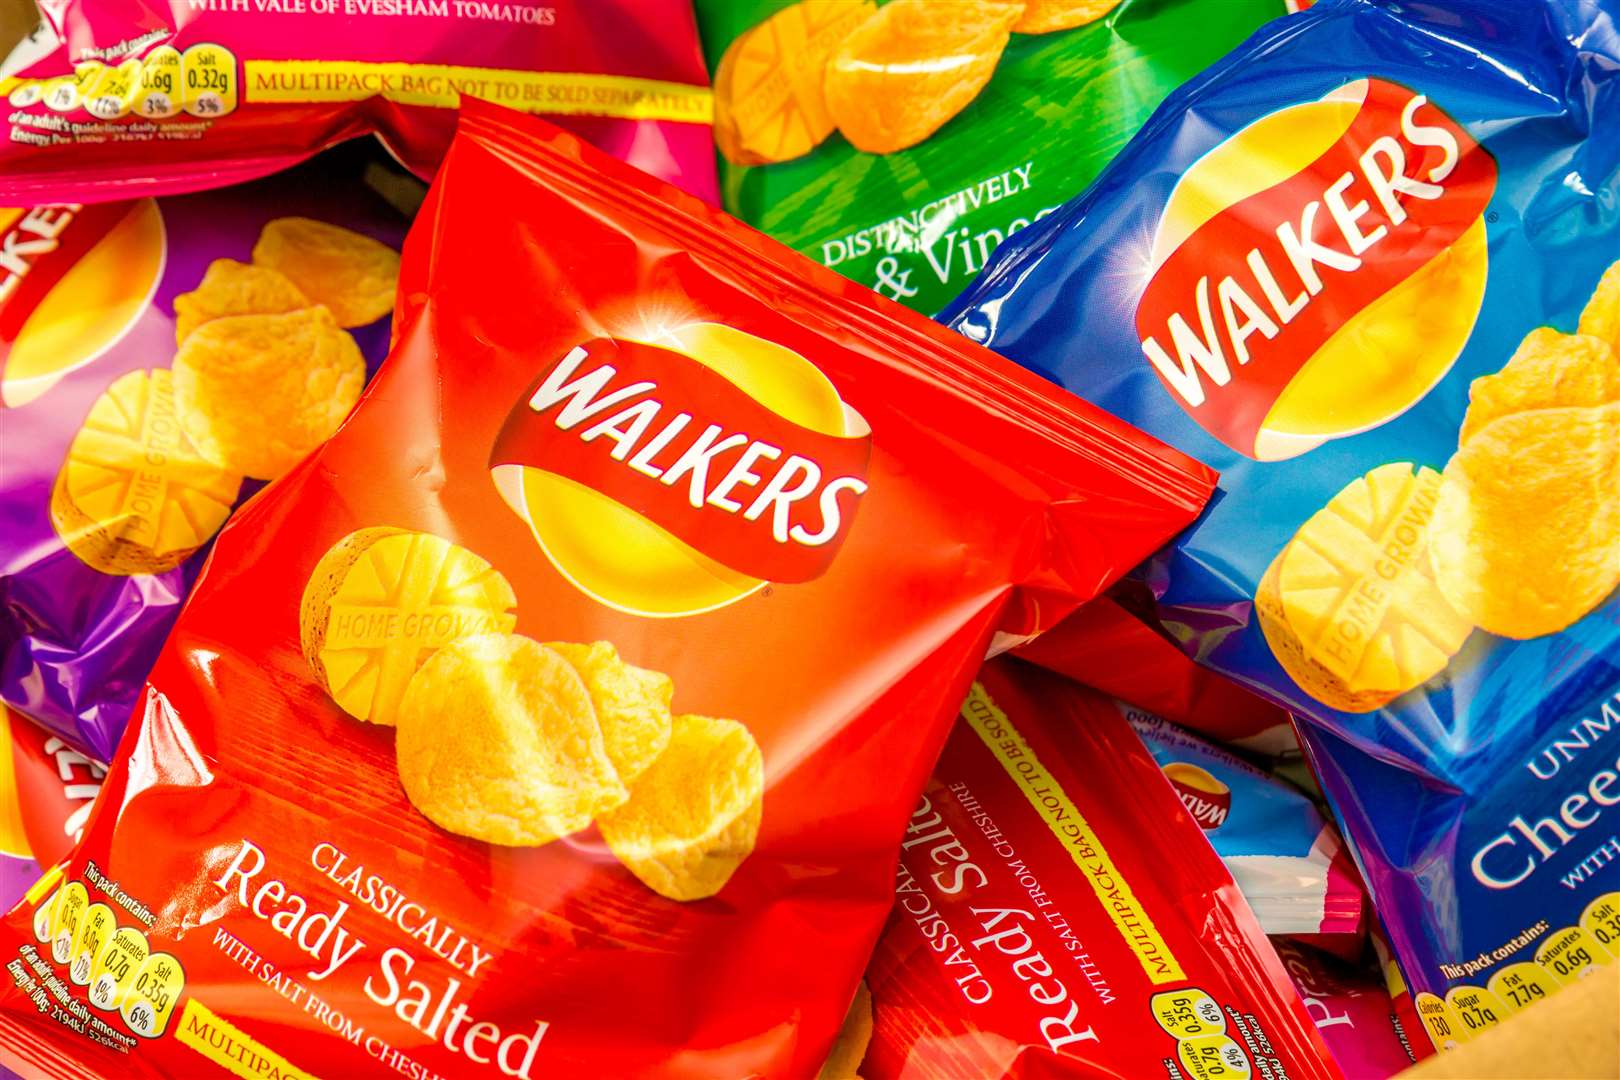 Walkers has been making Quavers since the 1990s. Image: iStock.